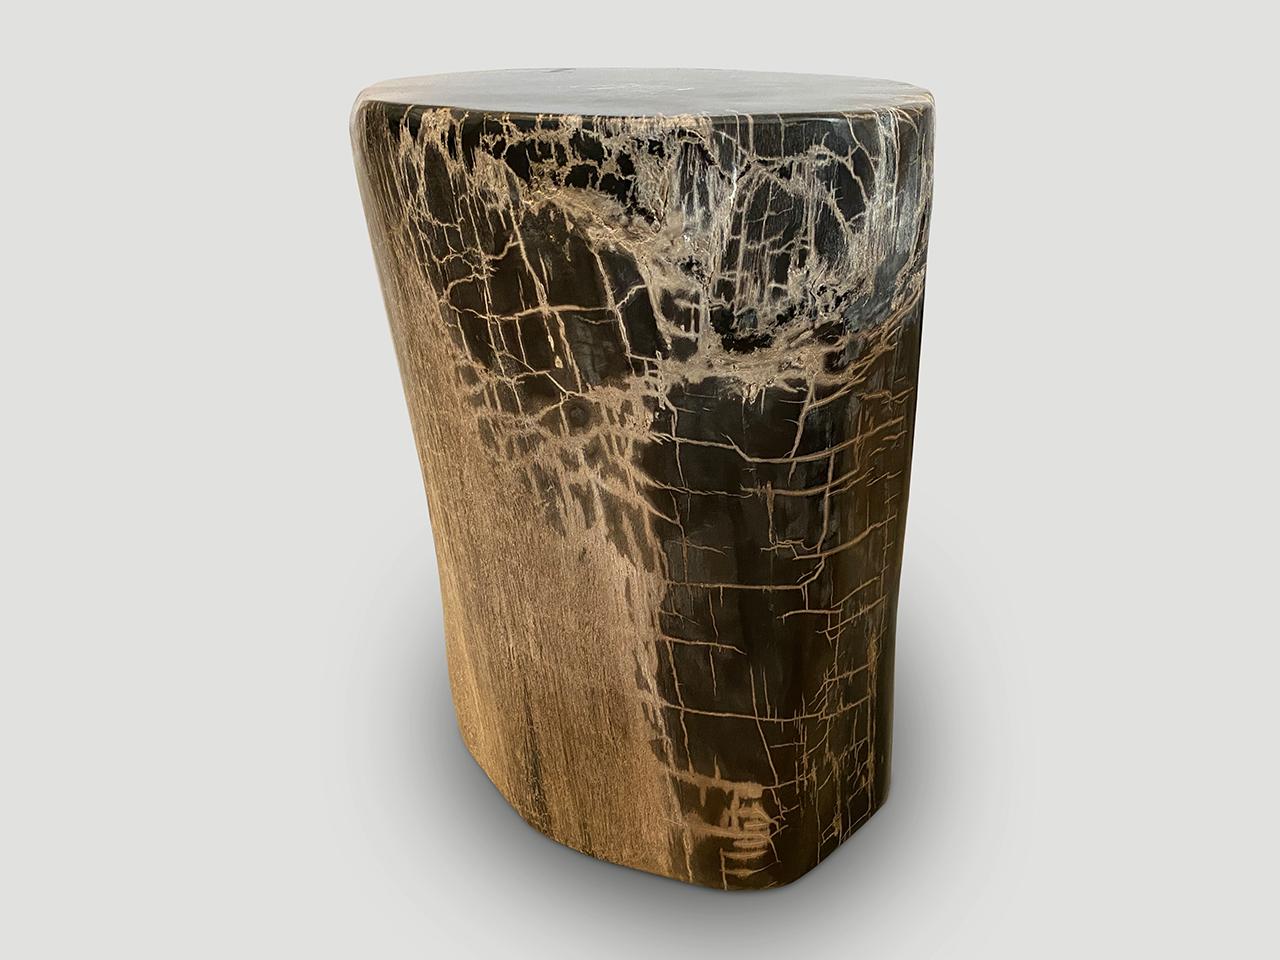 Rare beautiful tones and markings on this impressive high quality petrified wood side table. It’s fascinating how Mother Nature produces these exquisite 40 million year old petrified teak logs with such contrasting colors and natural patterns